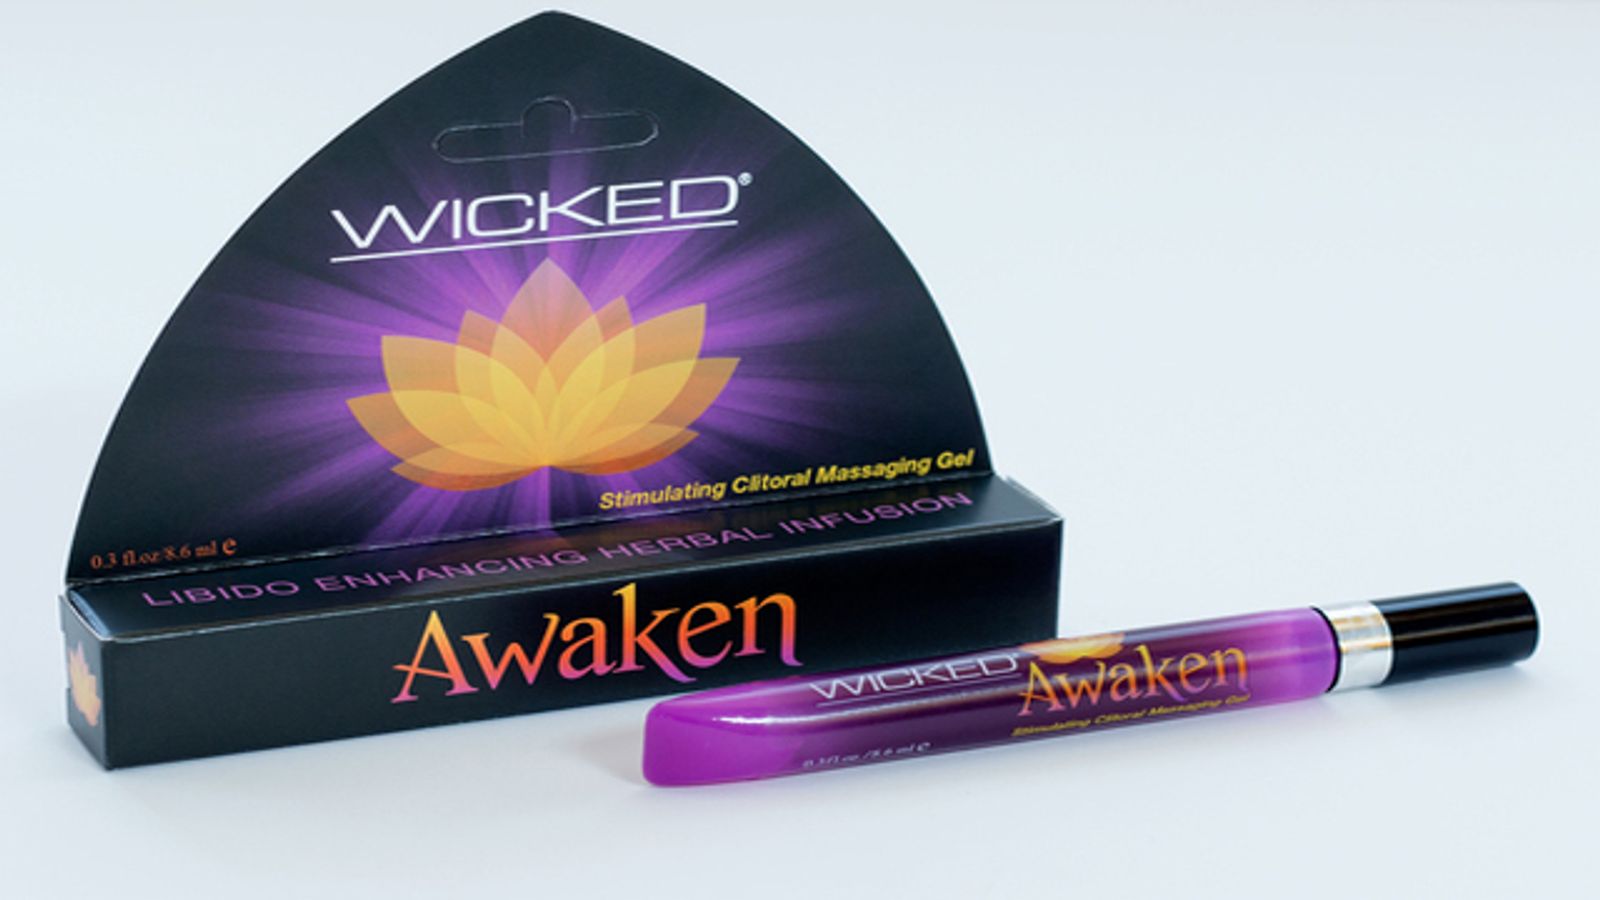 Wicked Sensual Care Takes Female Orgasms to New Heights